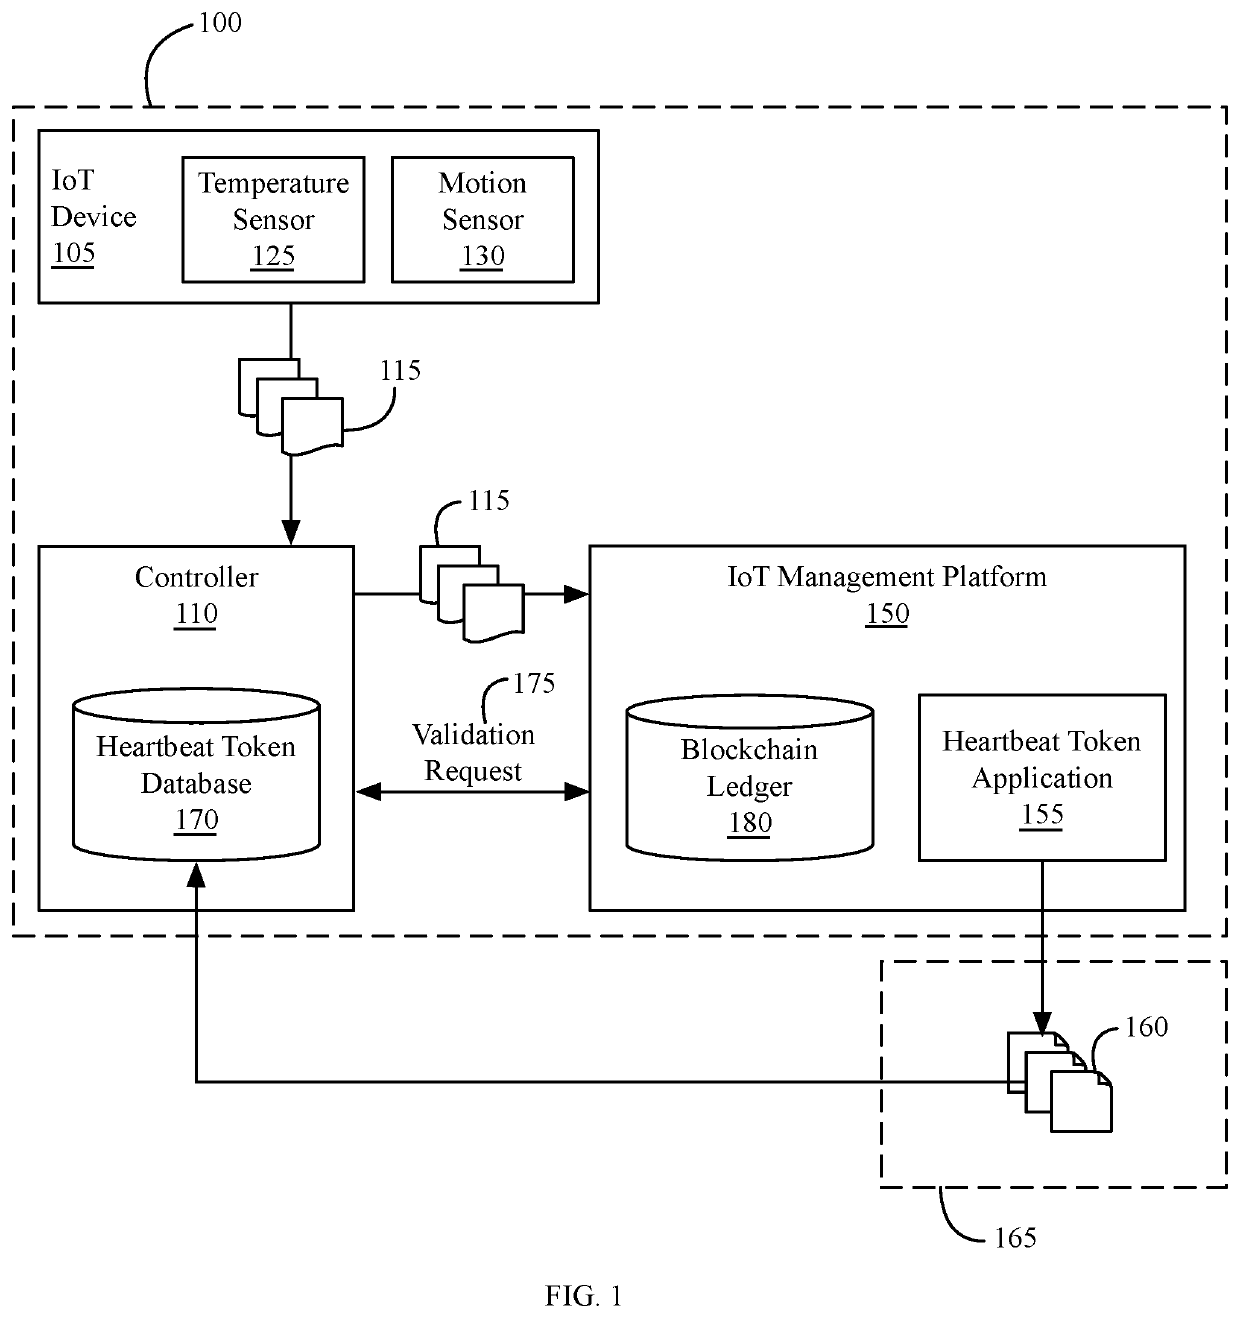 System and method of validating Internet of Things (IOT) devices